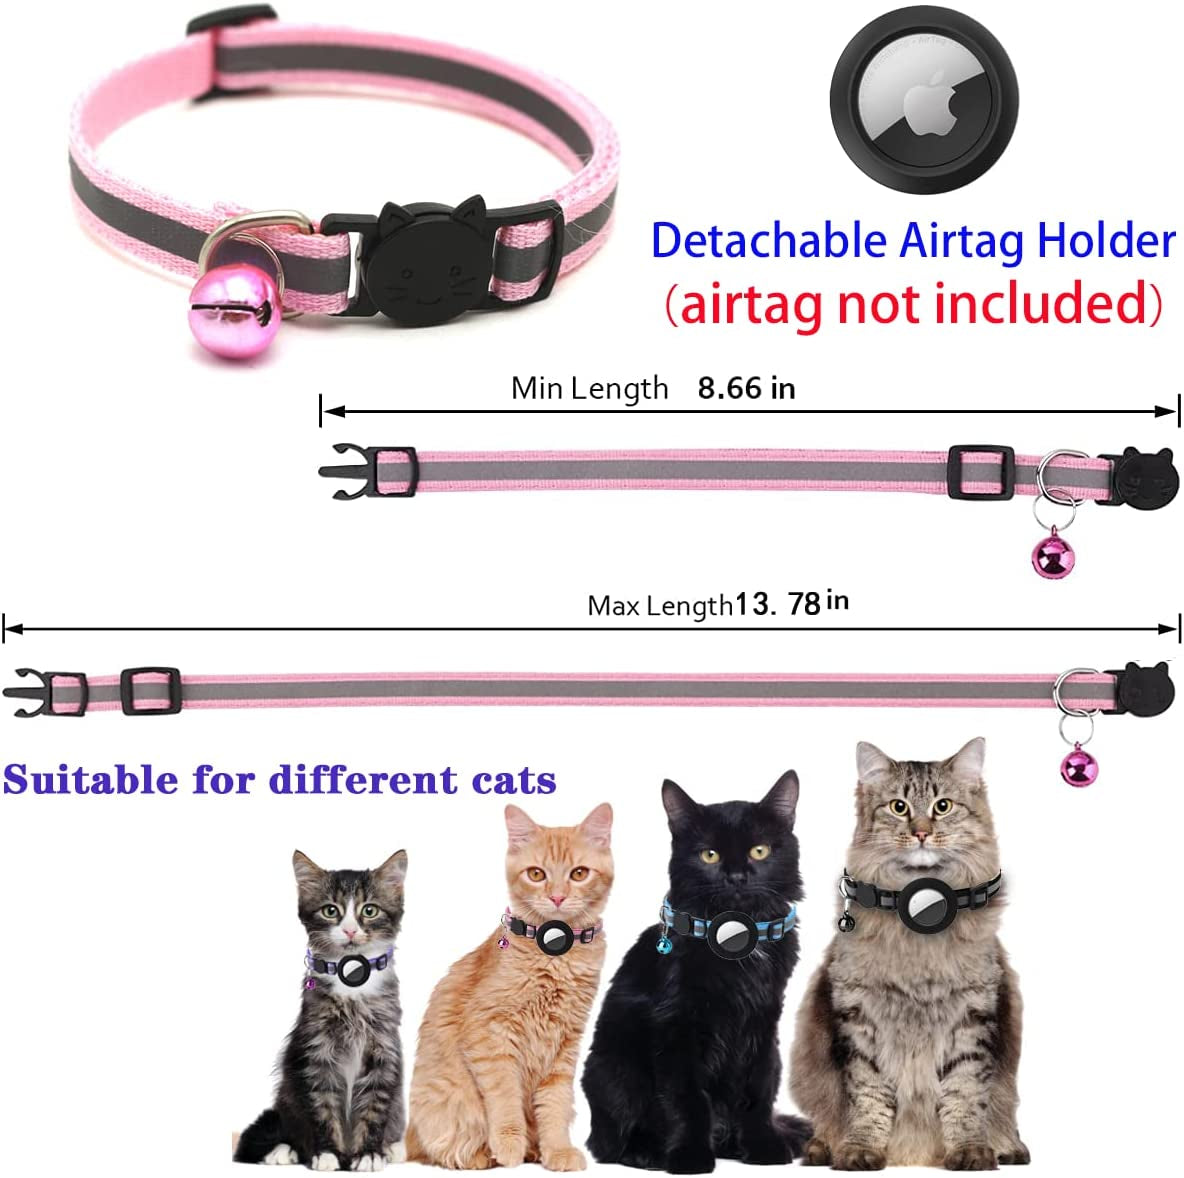 Smpili Airtag Cat Collar, Reflective Kitten Collar Breakaway with Airtag Holder, 0.4 Inches in Width